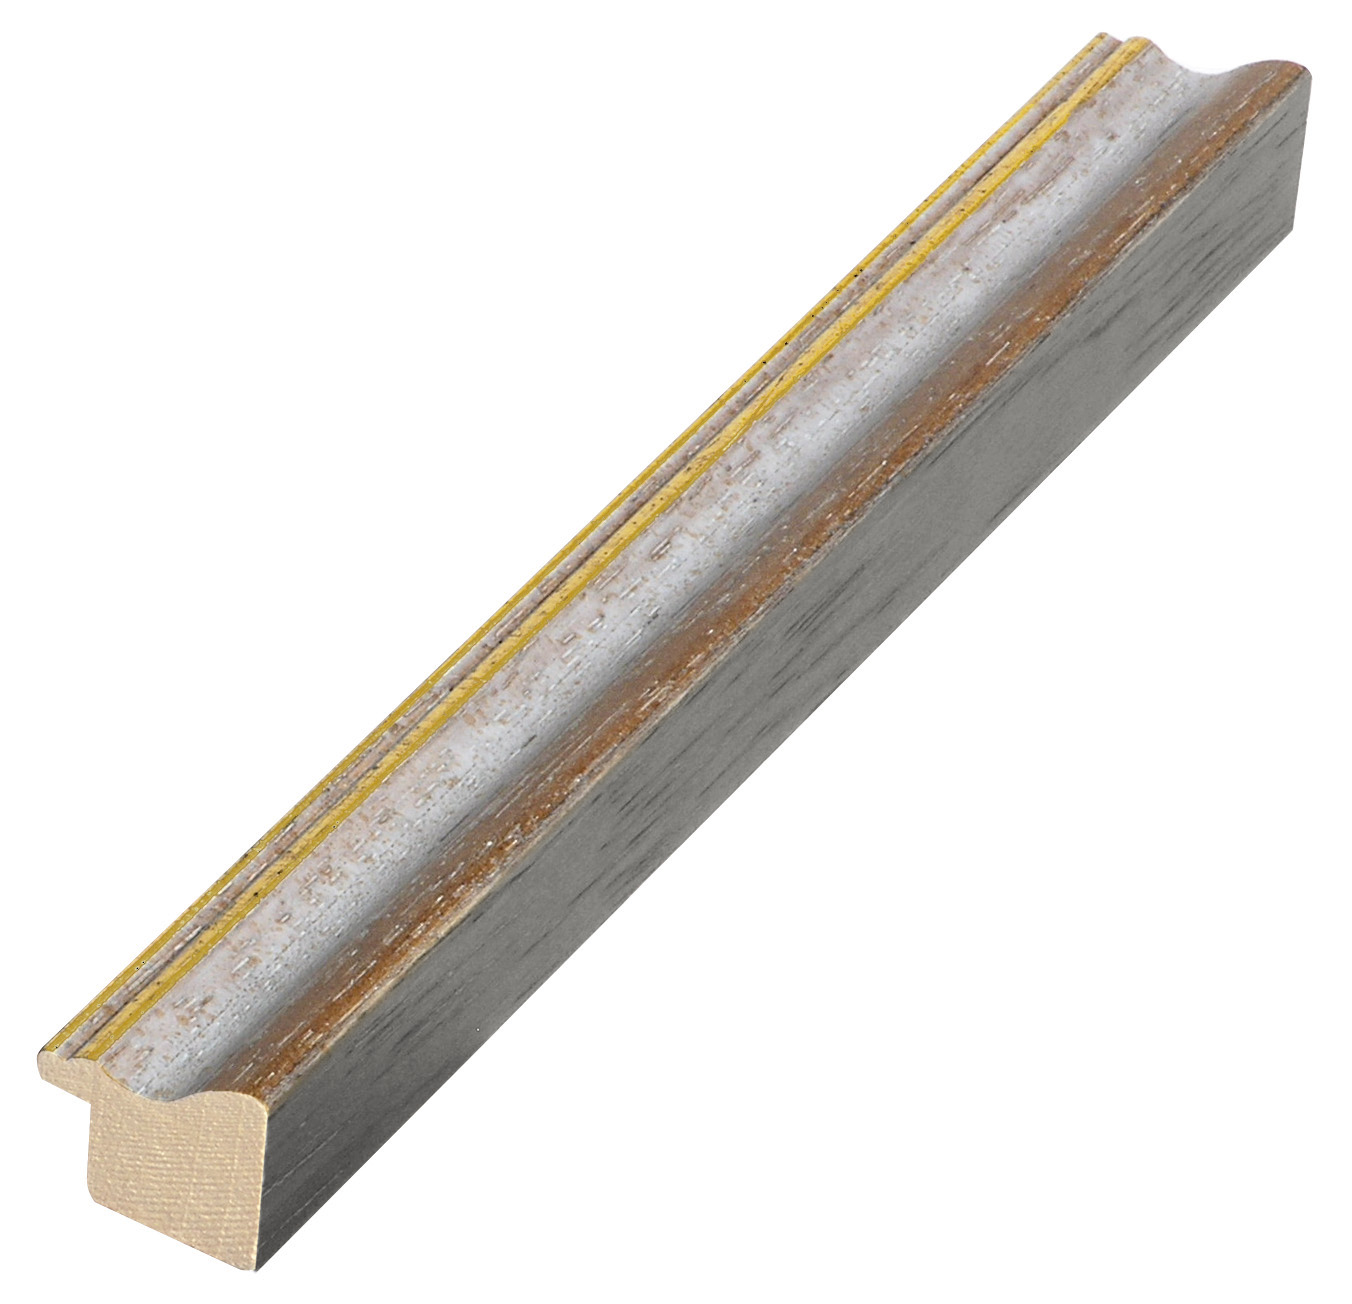 Moulding ayous jointed width 25mm - matt brown with gold edge - 246NOCE